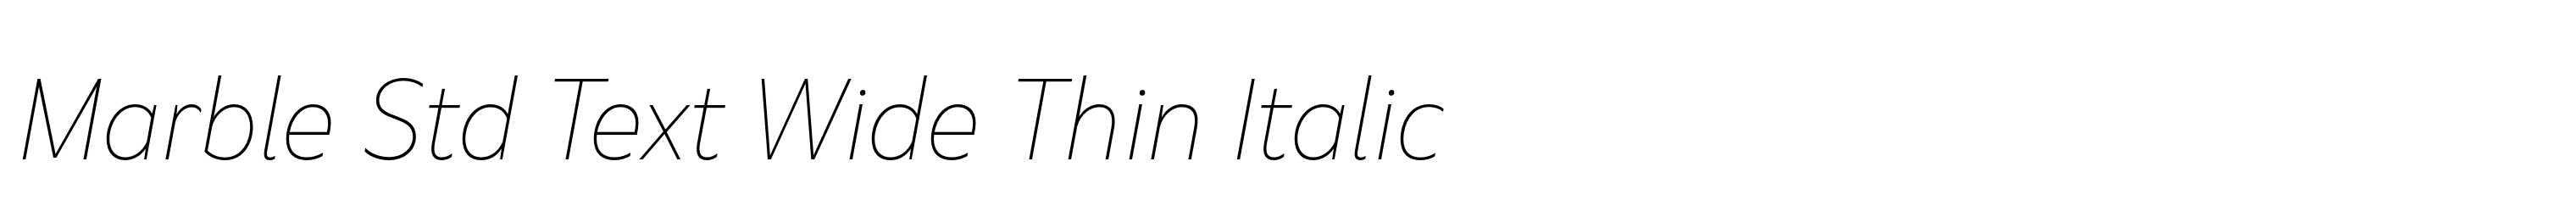 Marble Std Text Wide Thin Italic